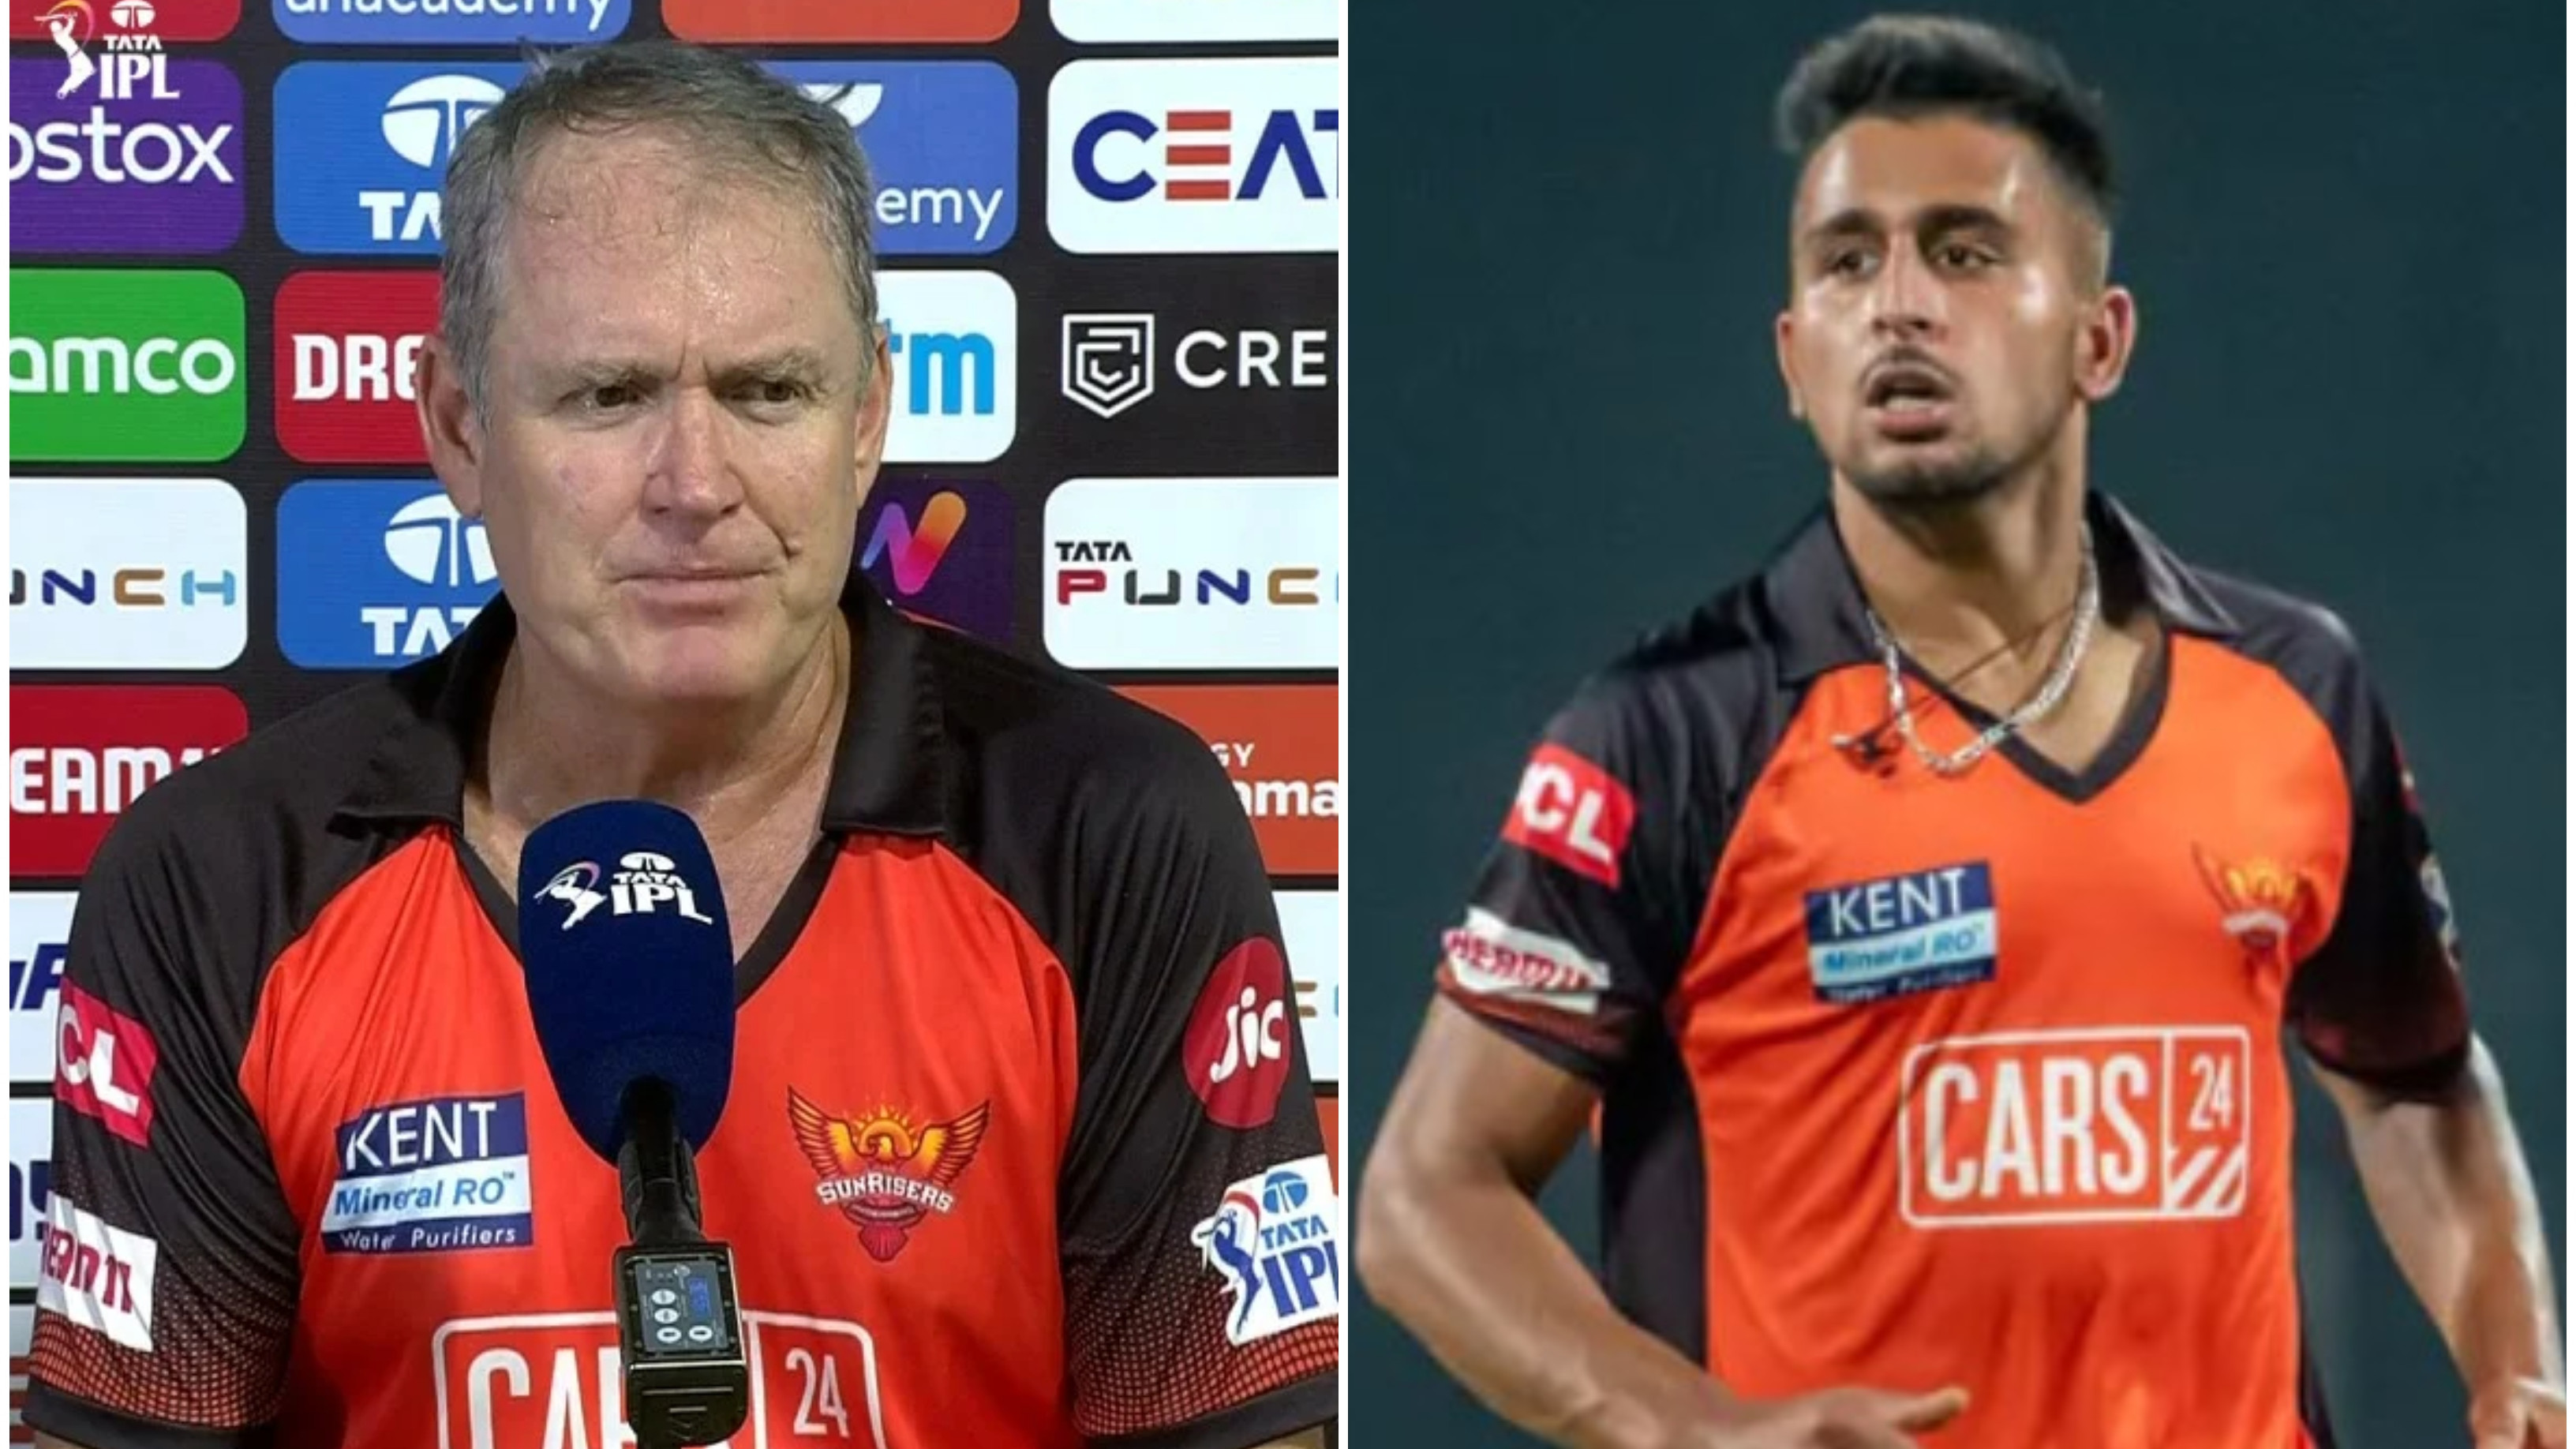 IPL 2022: “He's on a very steep learning curve”, Tom Moody says Umran Malik has full backing of SRH management